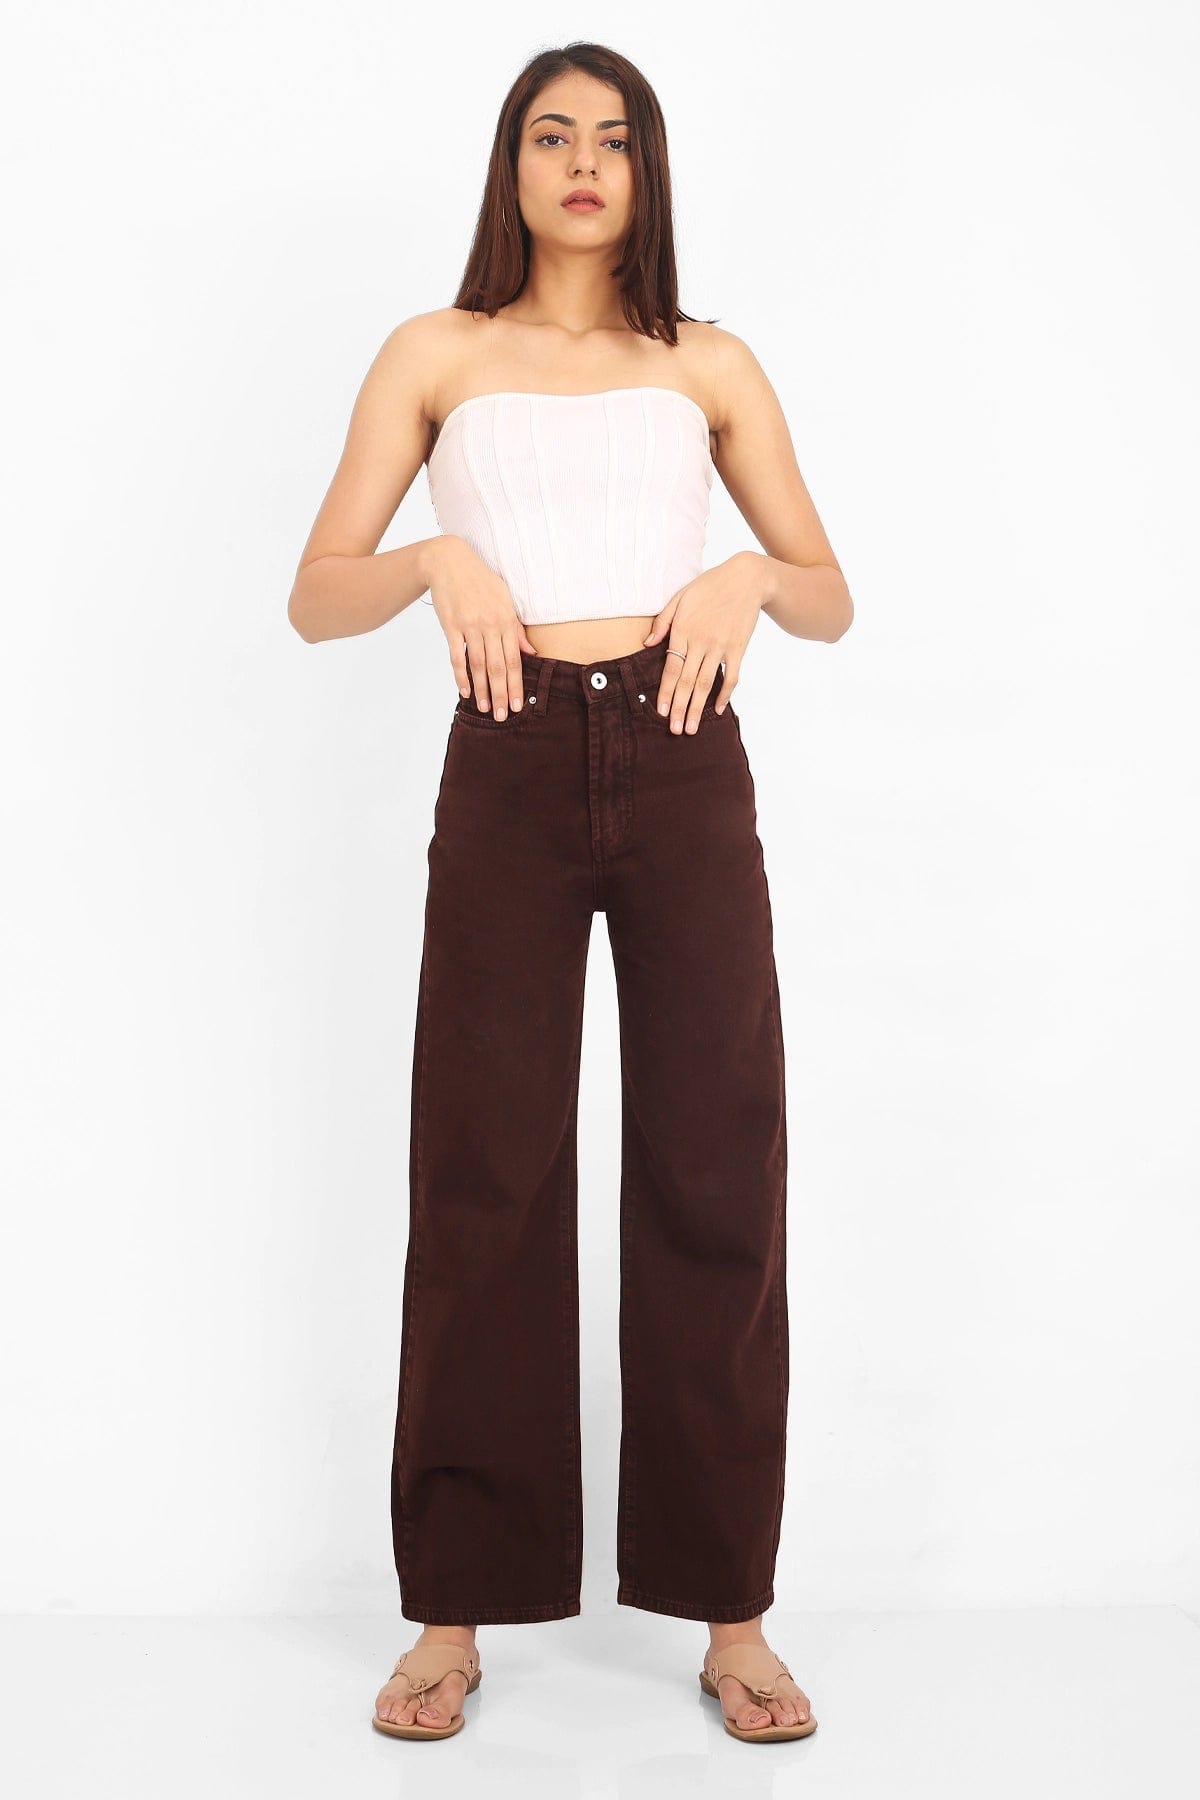 Buy Z  G trends Brown Wide Leg HIGH Rise Jeans 26 at Amazonin